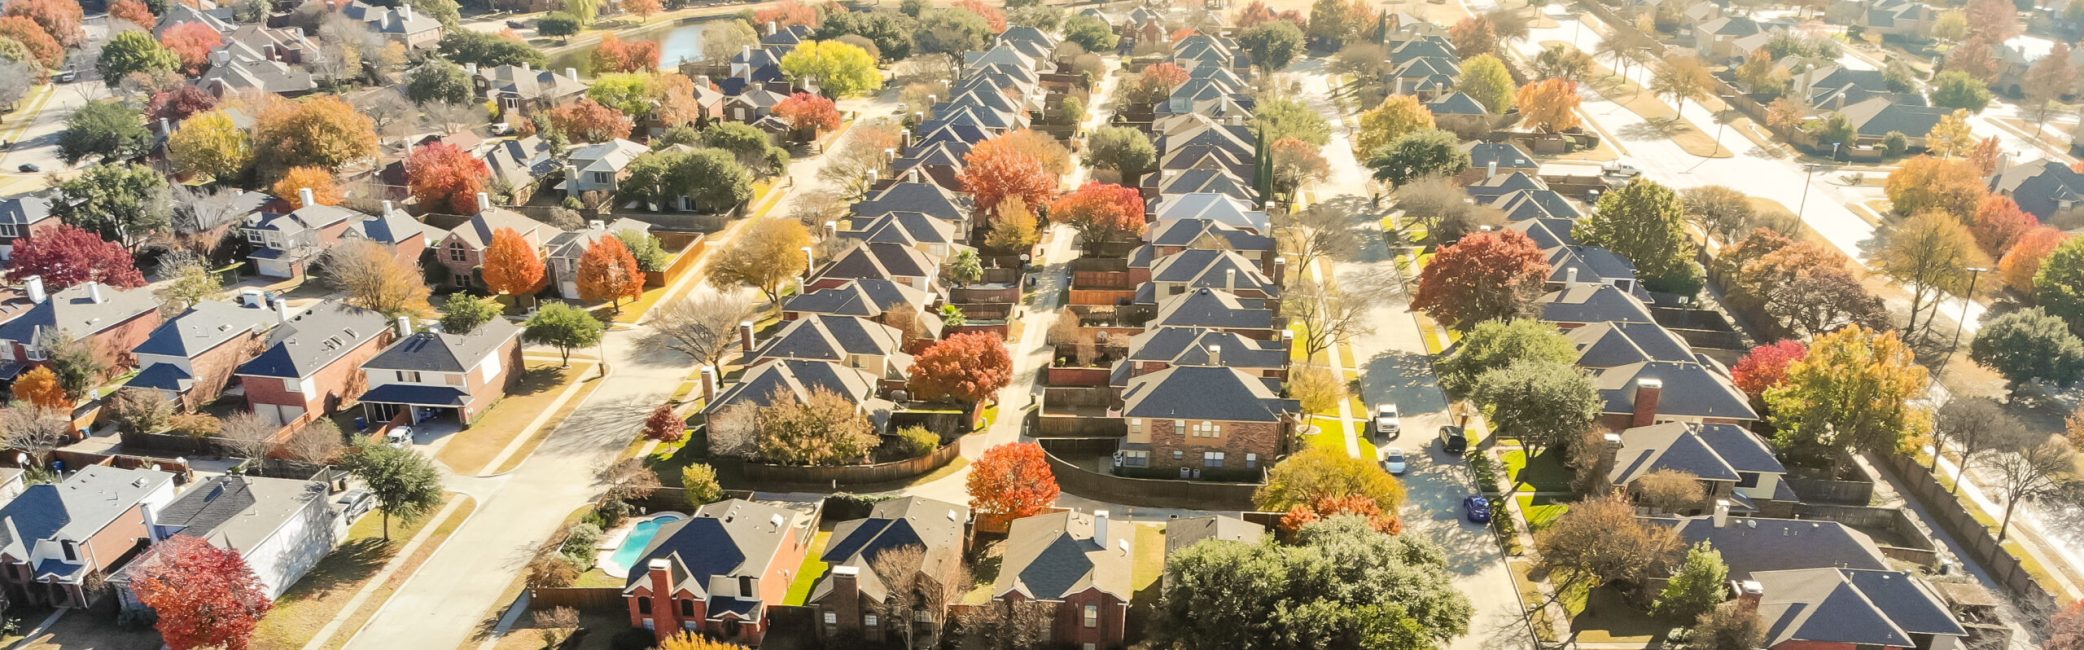 Aerial view row of new house with cul-de-sac (dead-end) and bright orange color fall foliage near Dallas